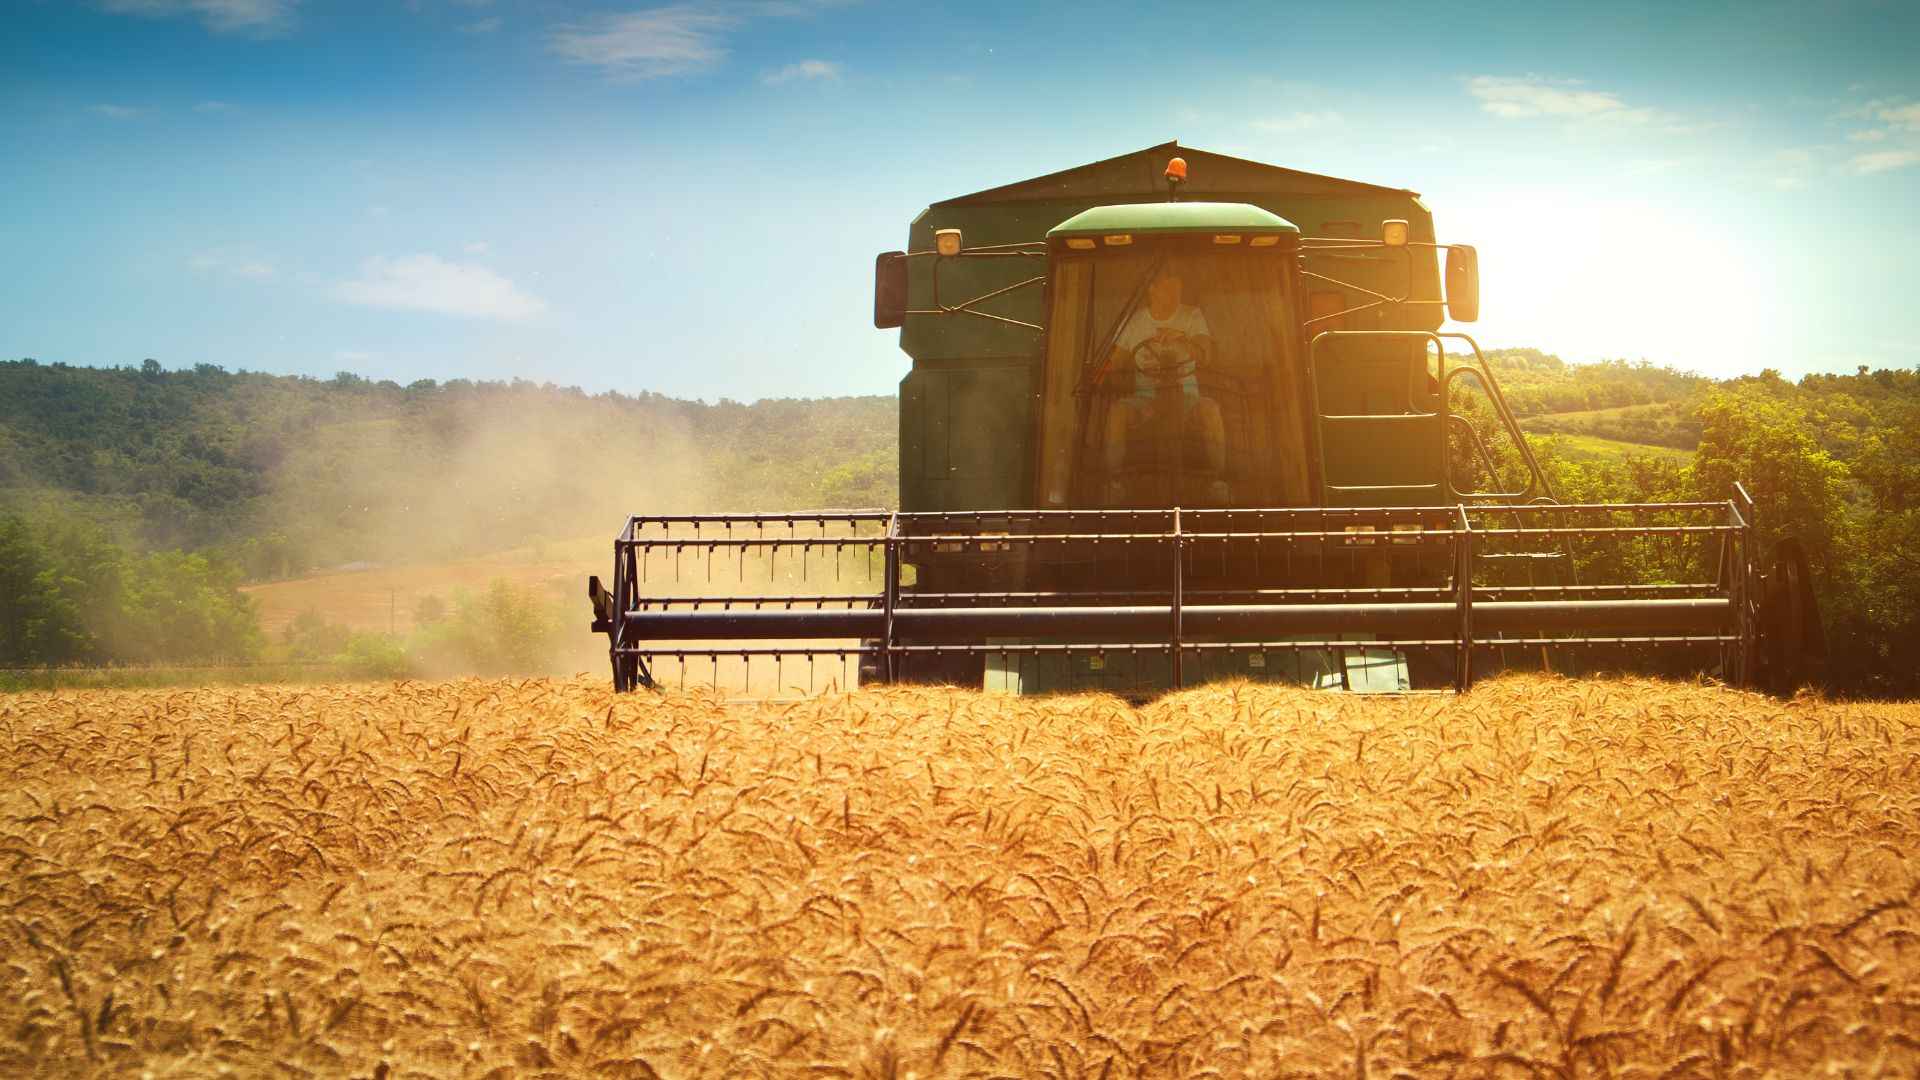 Conab estimates a 17,4% increase in grain production for the 22/23 harvest